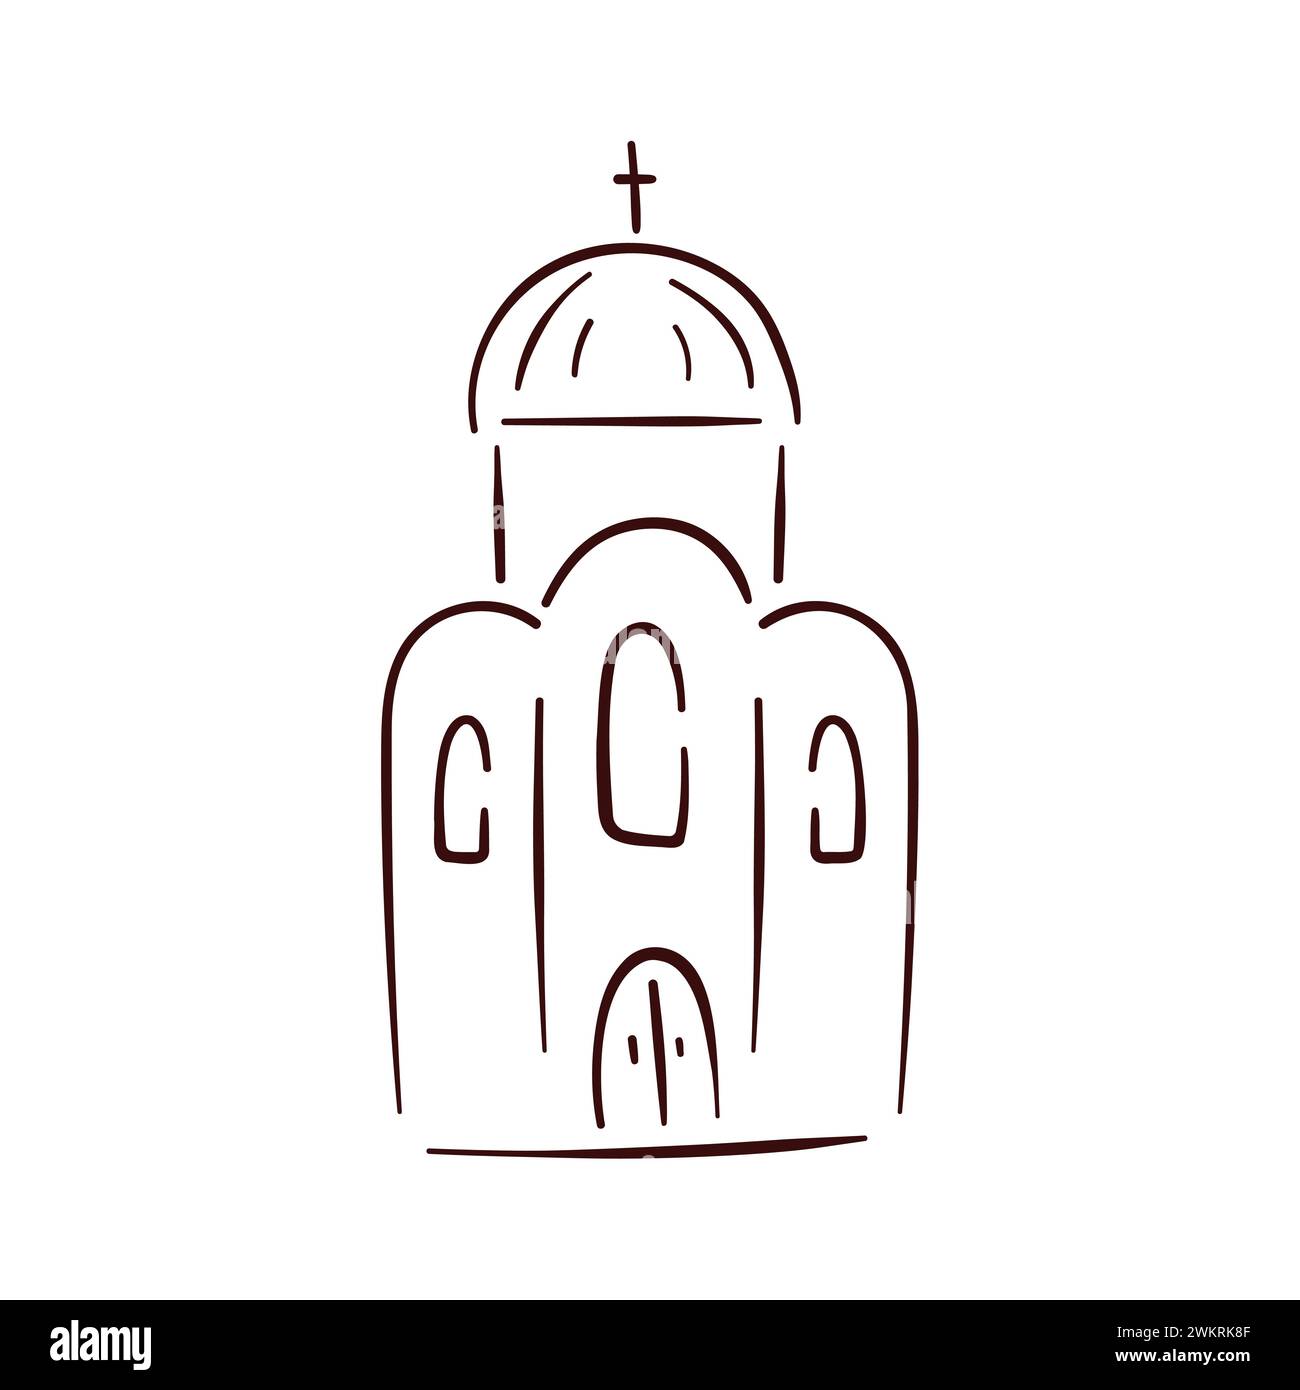 Church symbol in line art style. Hand drawn vector illustration isolated on a white background. Stock Vector